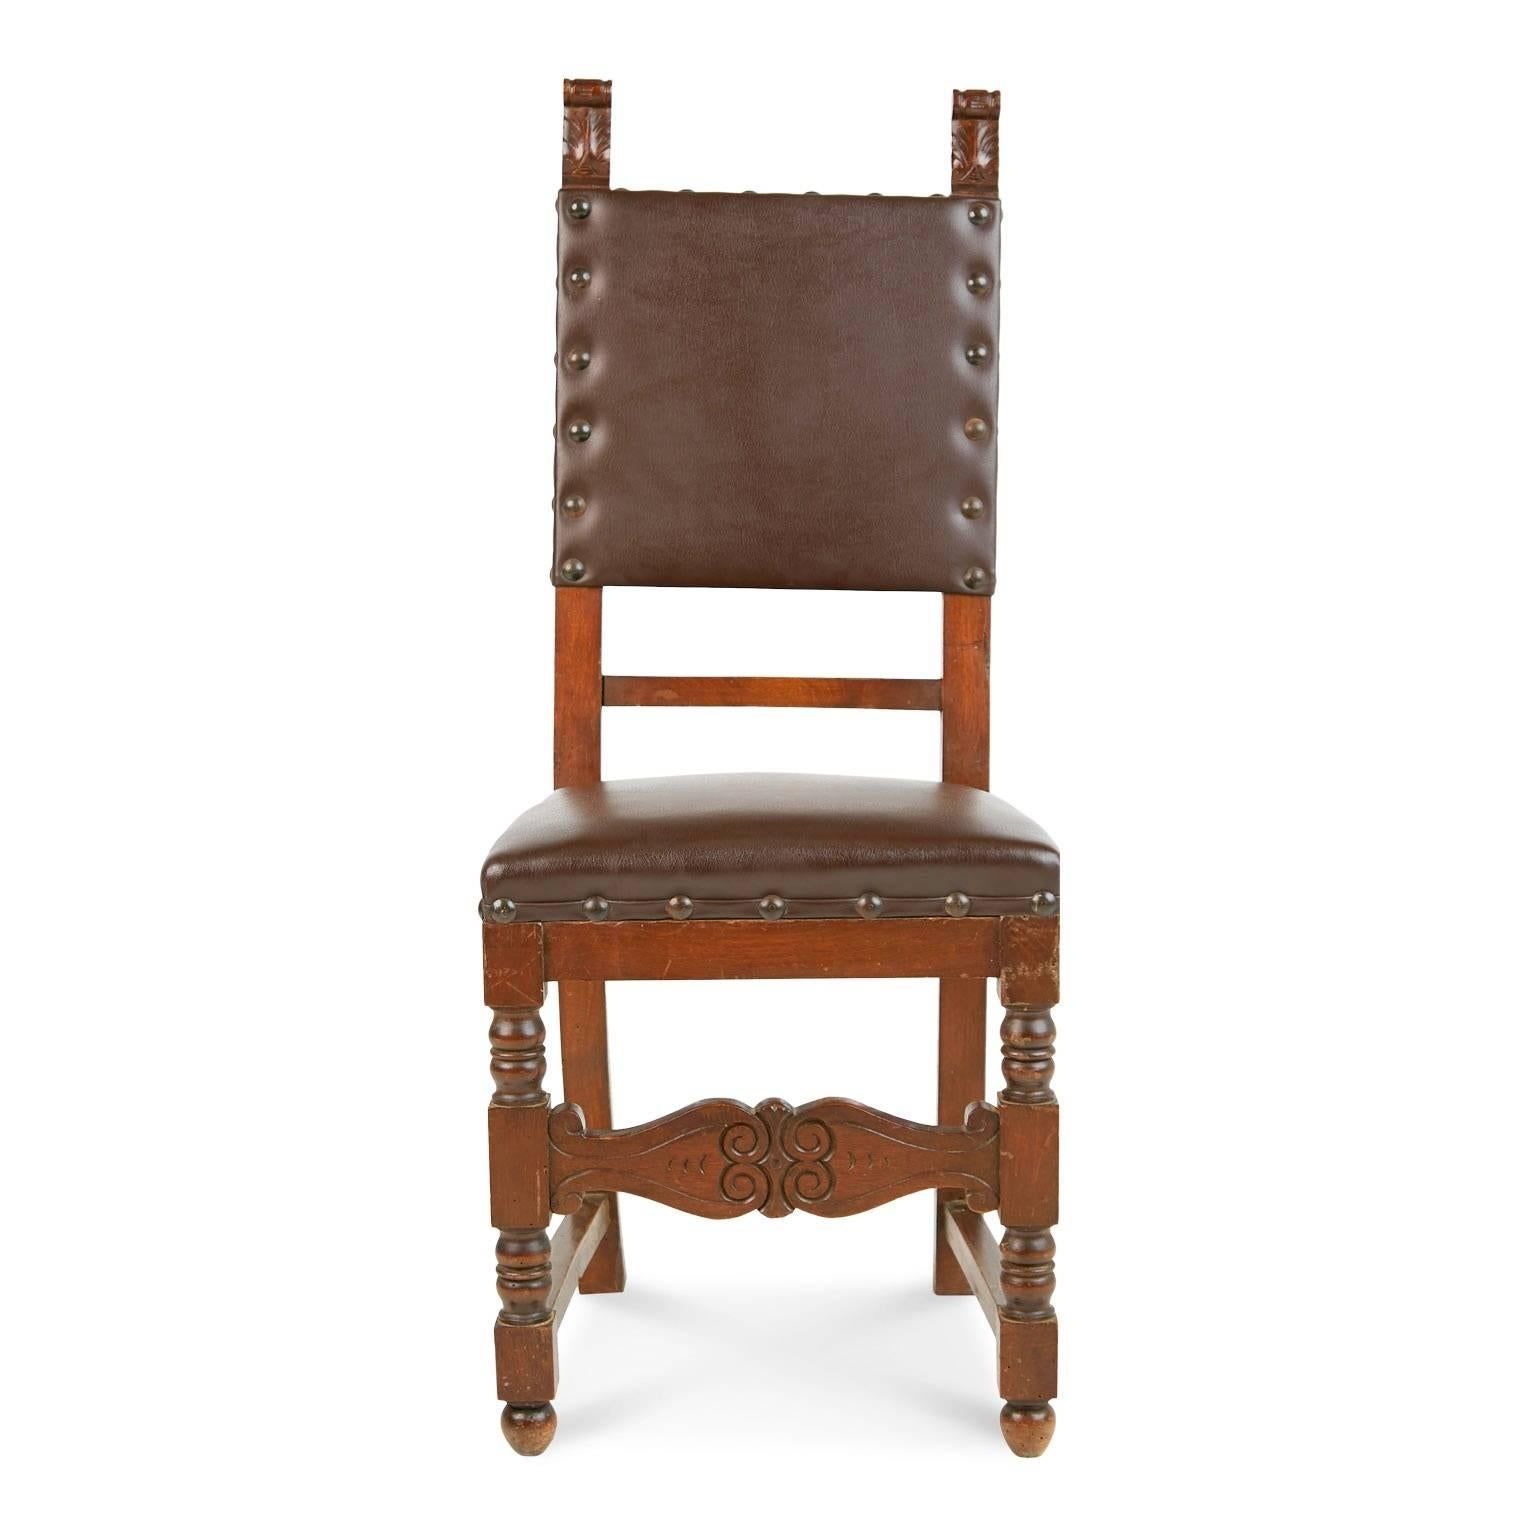 Beautifully crafted pair of aged Italian Renaissance Revival style side chairs. Each feature foliate finials, turned legs and carved stretchers across the front with coiled embellishments. The upholstery on the seats and backs is a rich brown